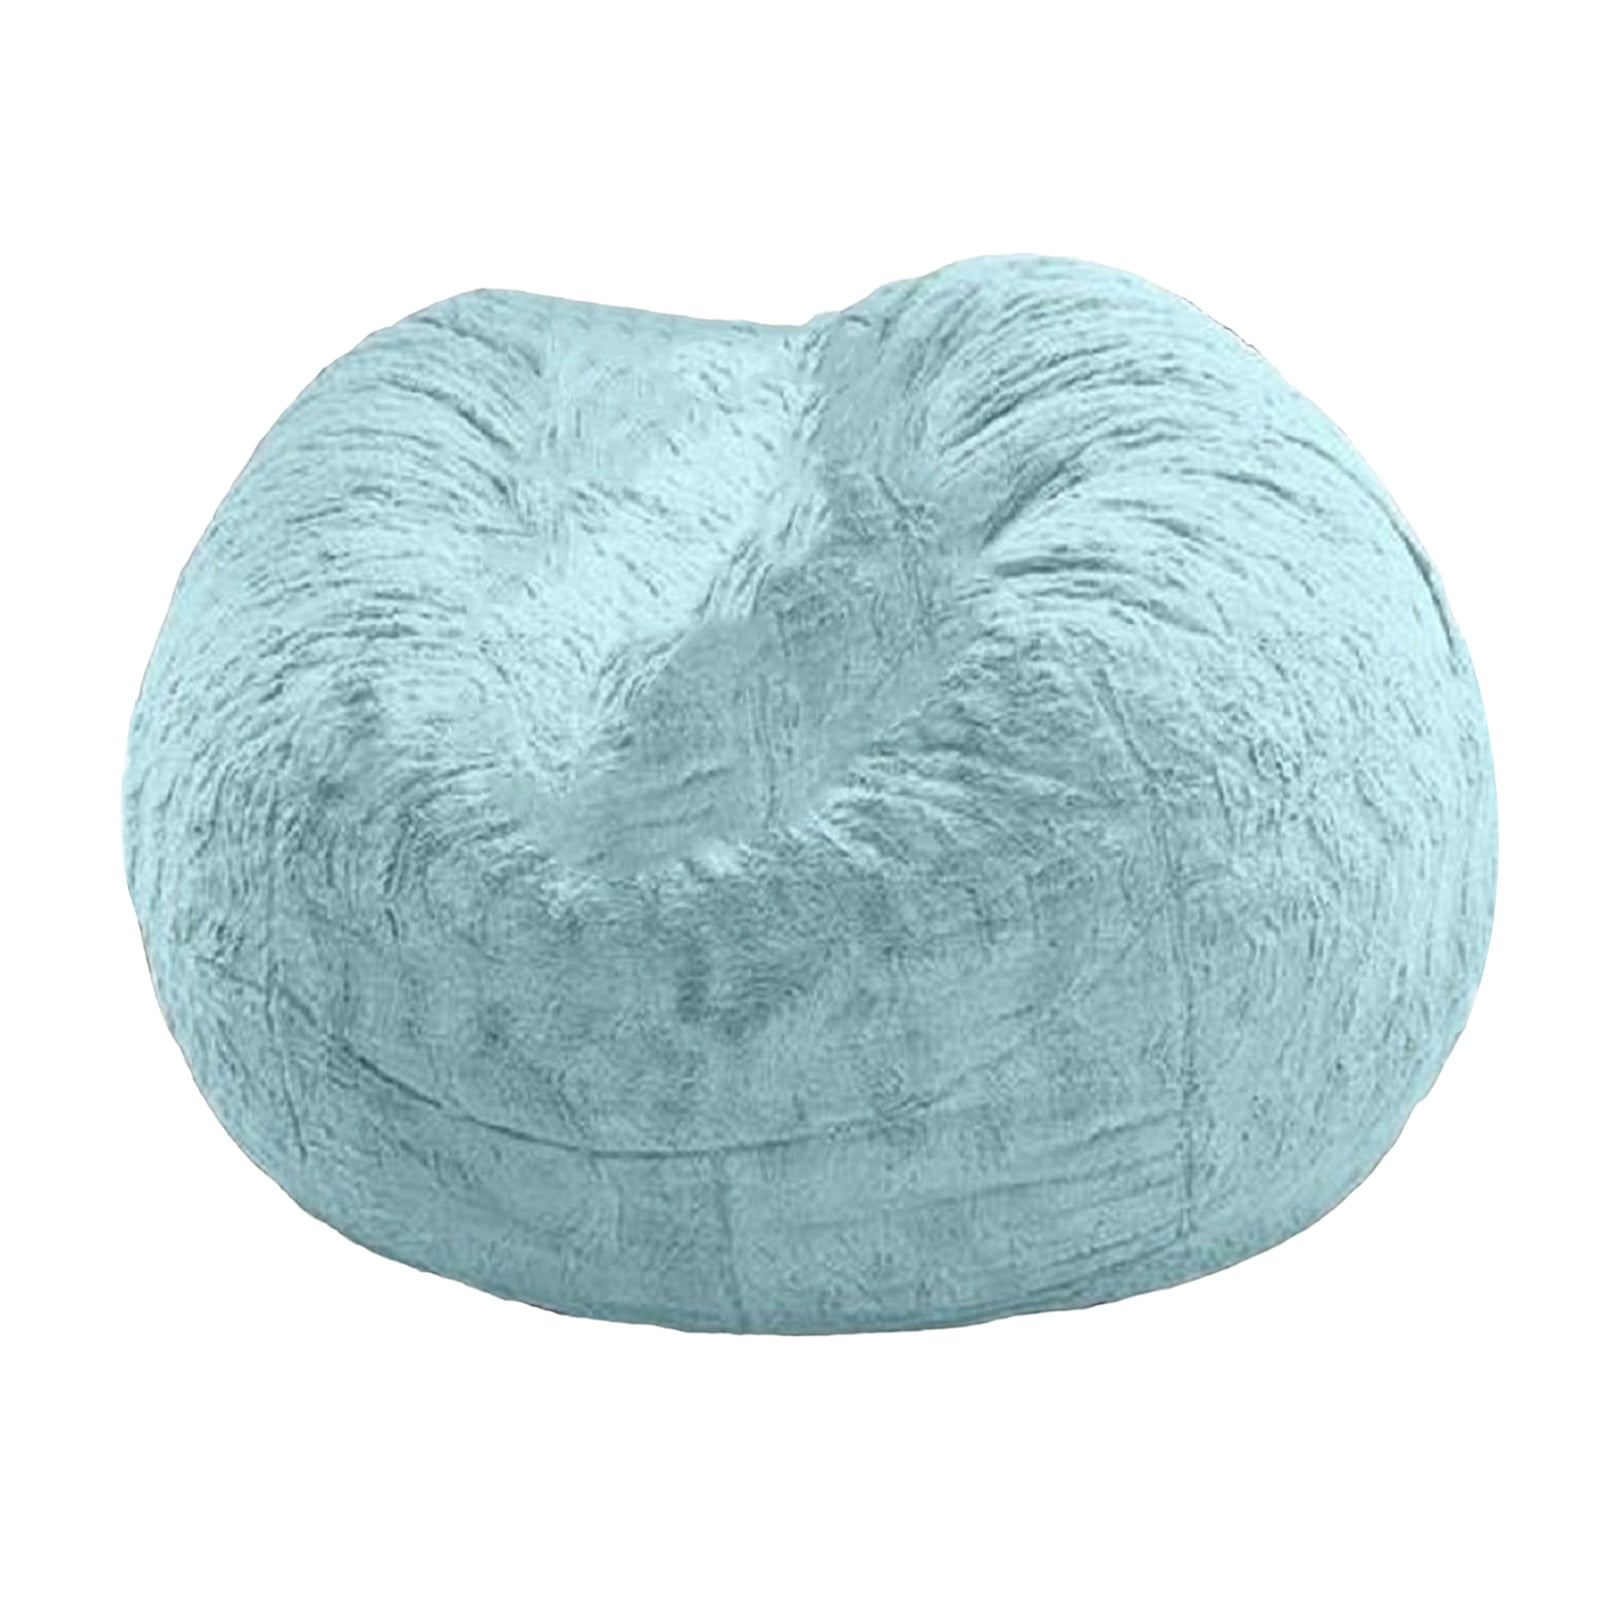 ZUVUYUO New Lazy Sofas Beanbag Chair Cover (No Filler) Multifunctional Bean  Bag Chair for Adults, Giant Bean Bag Chair Cover can Relax and Easy to